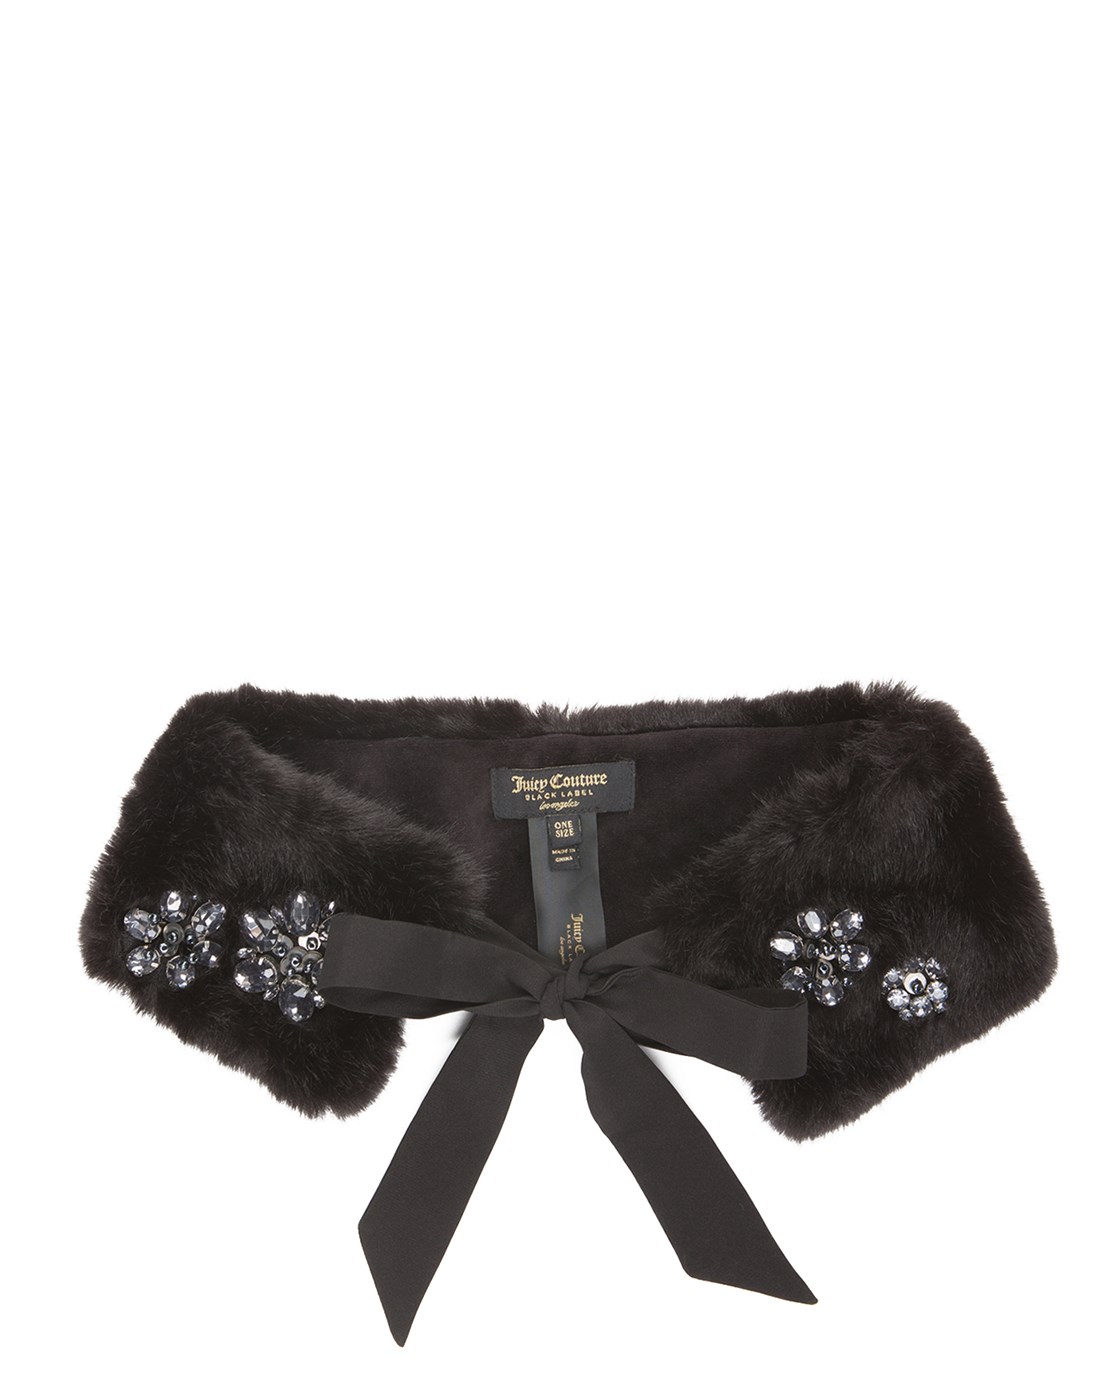 Juicy Couture Embellished Faux Fur Scarf